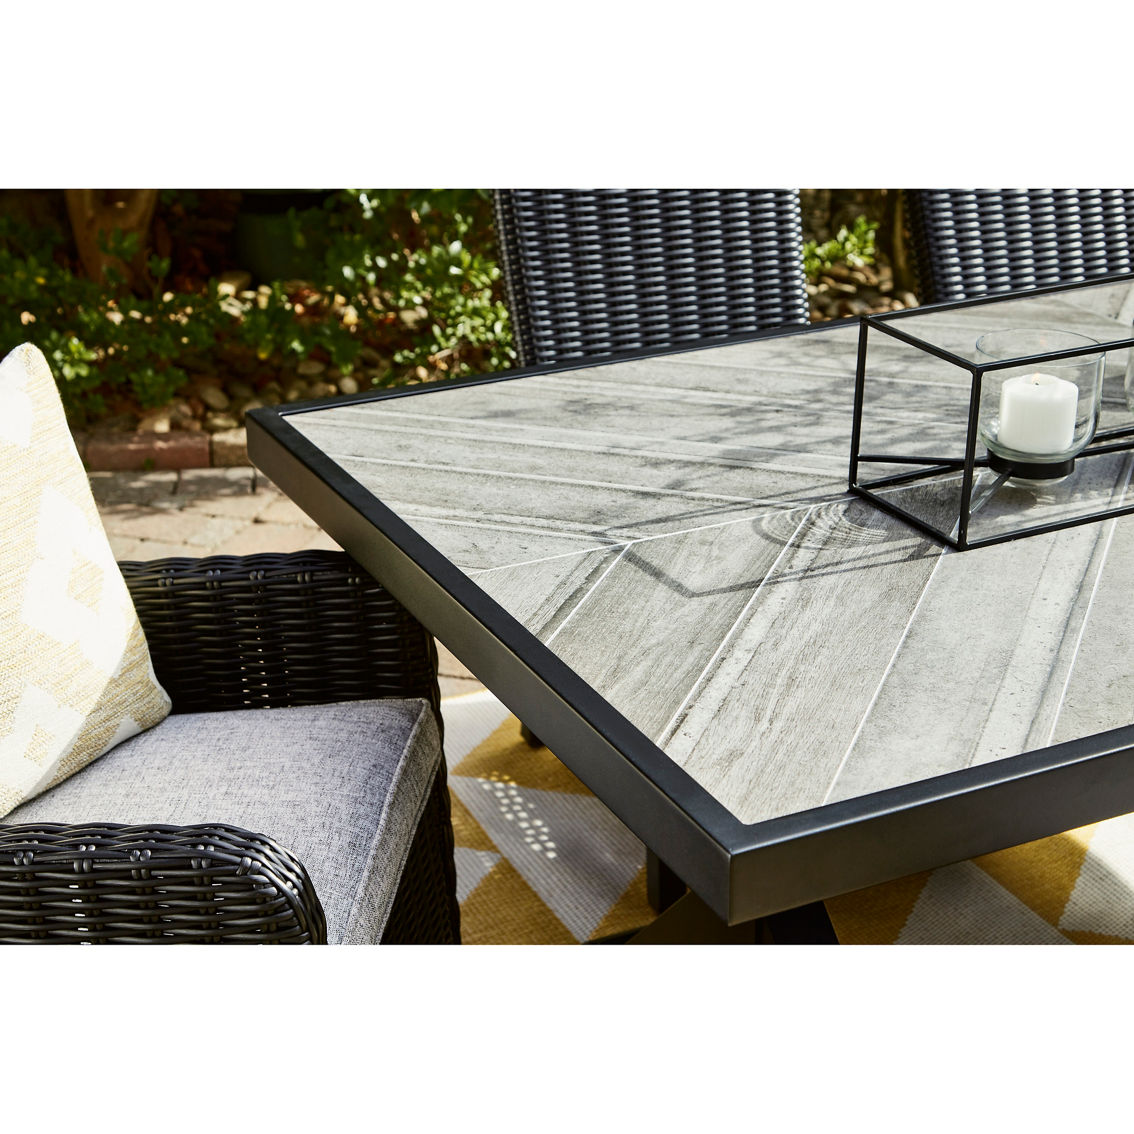 Signature Design by Ashley Beachcroft 6 pc. Outdoor Dining Set with Bench - Image 6 of 7